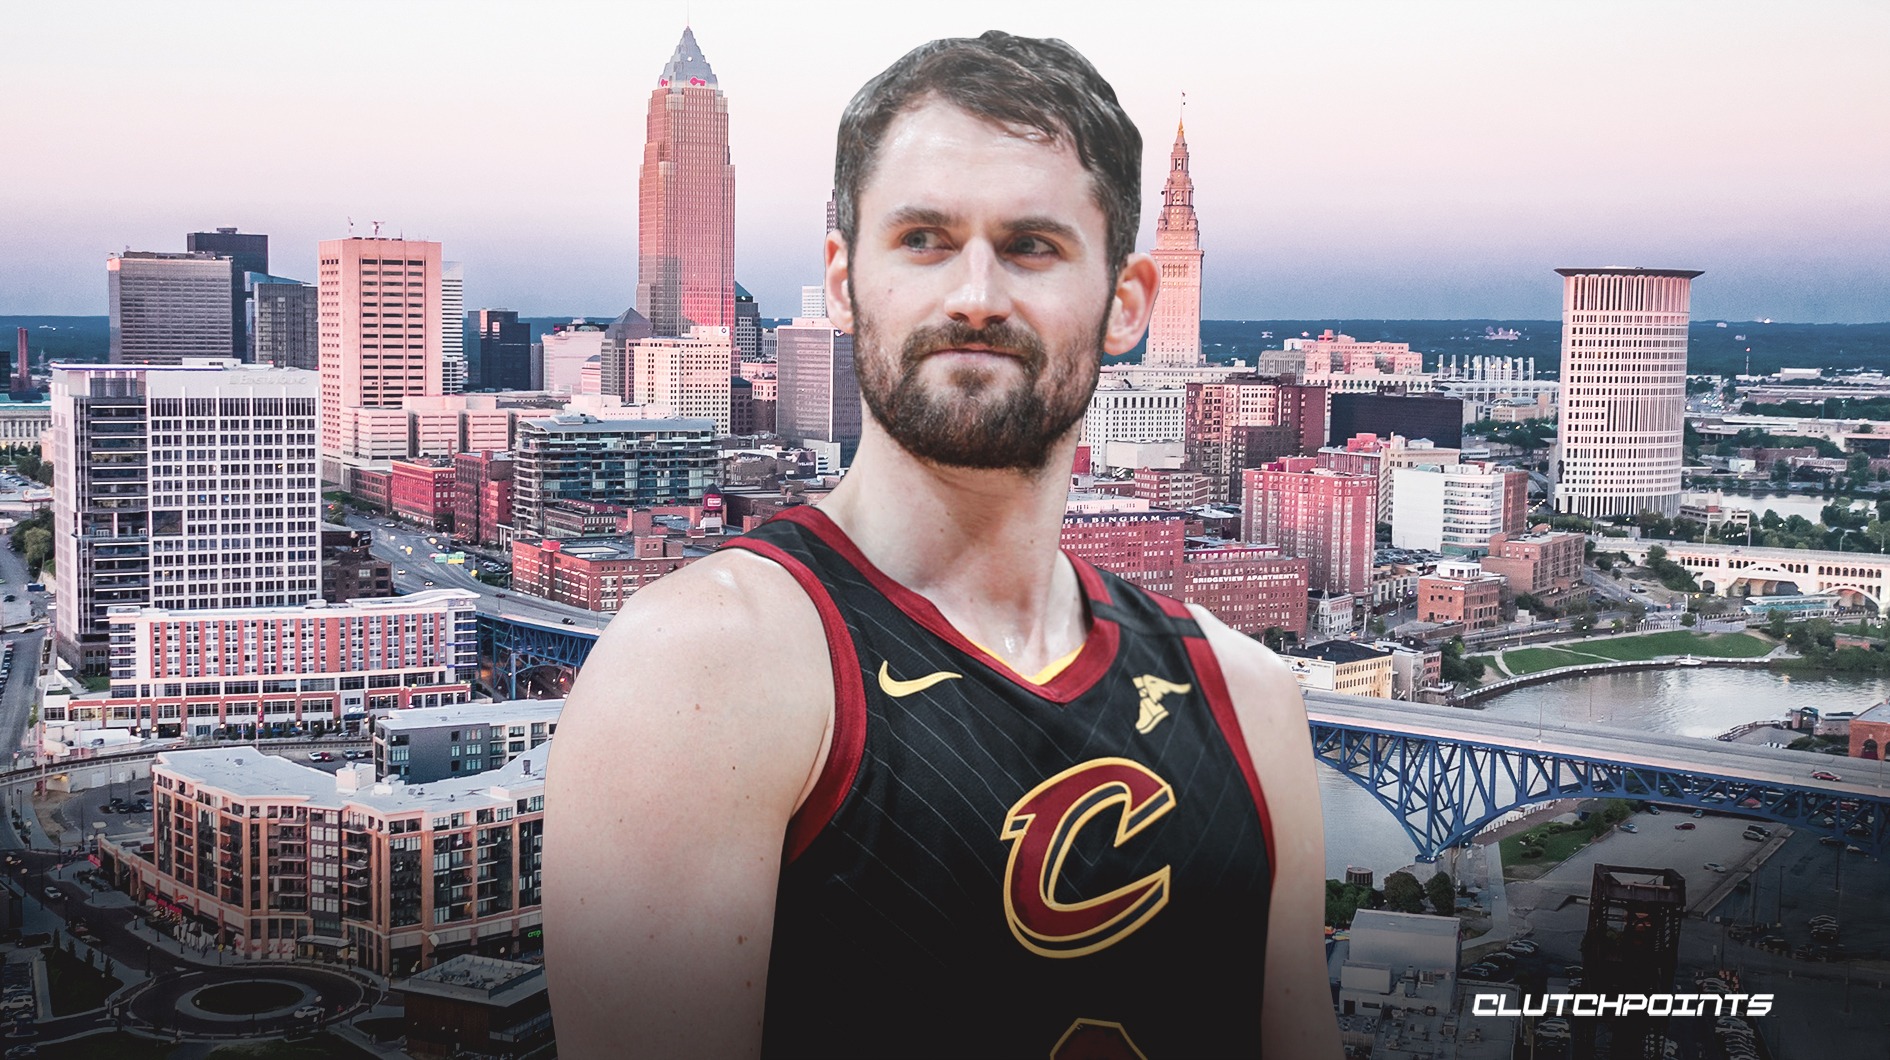 Kevin Love, Cavaliers